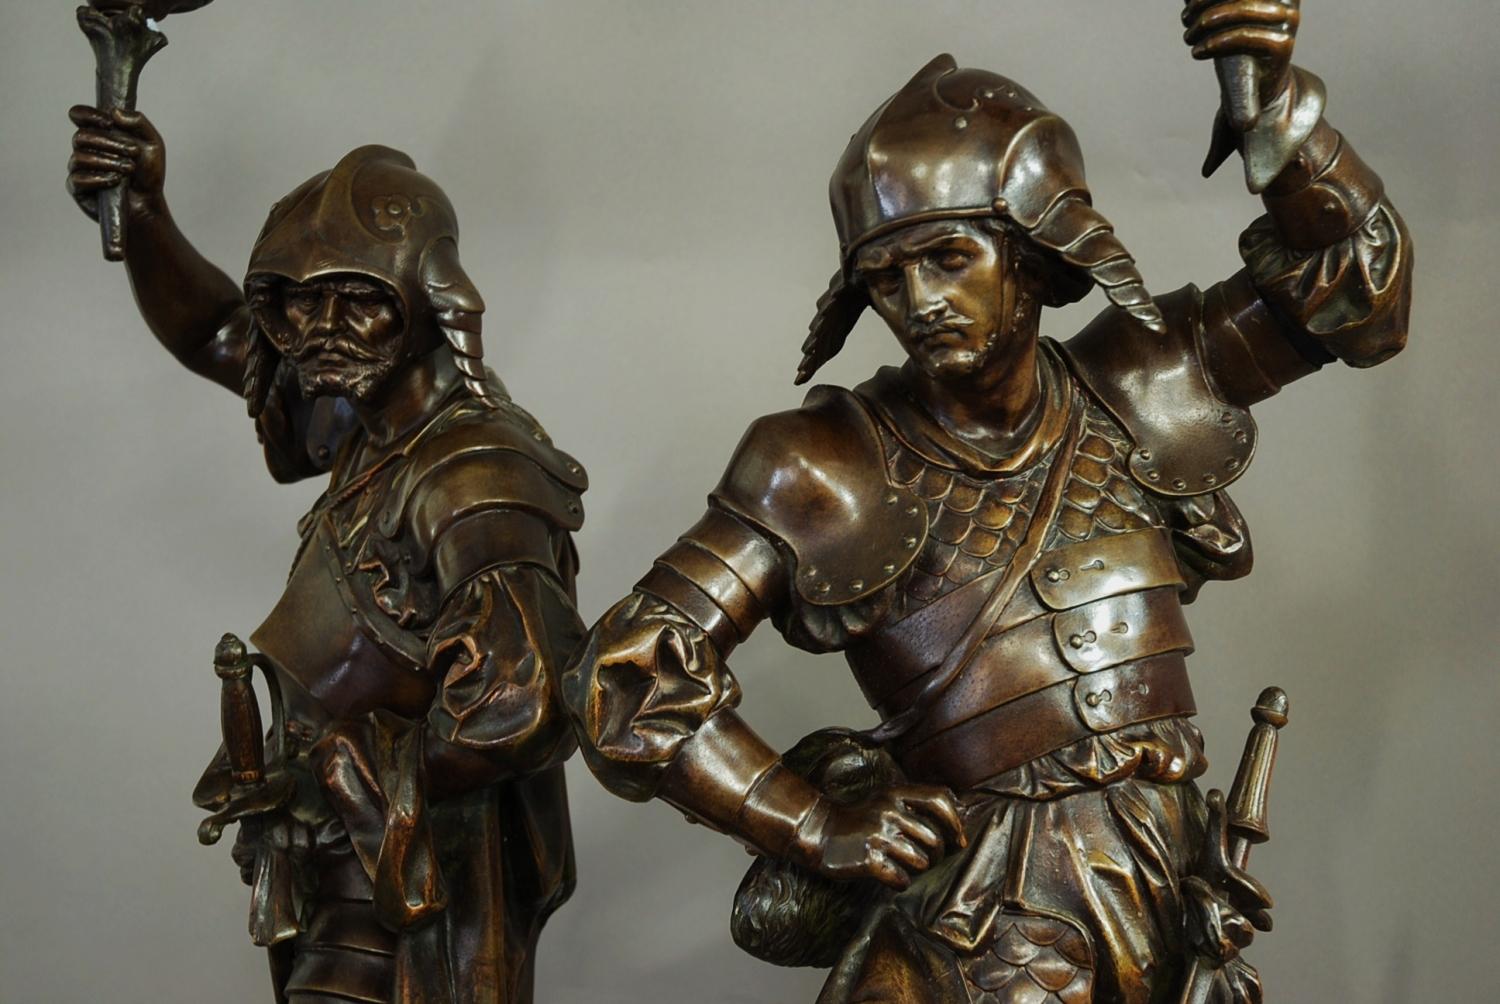 Superb large pair of French bronzed warriors